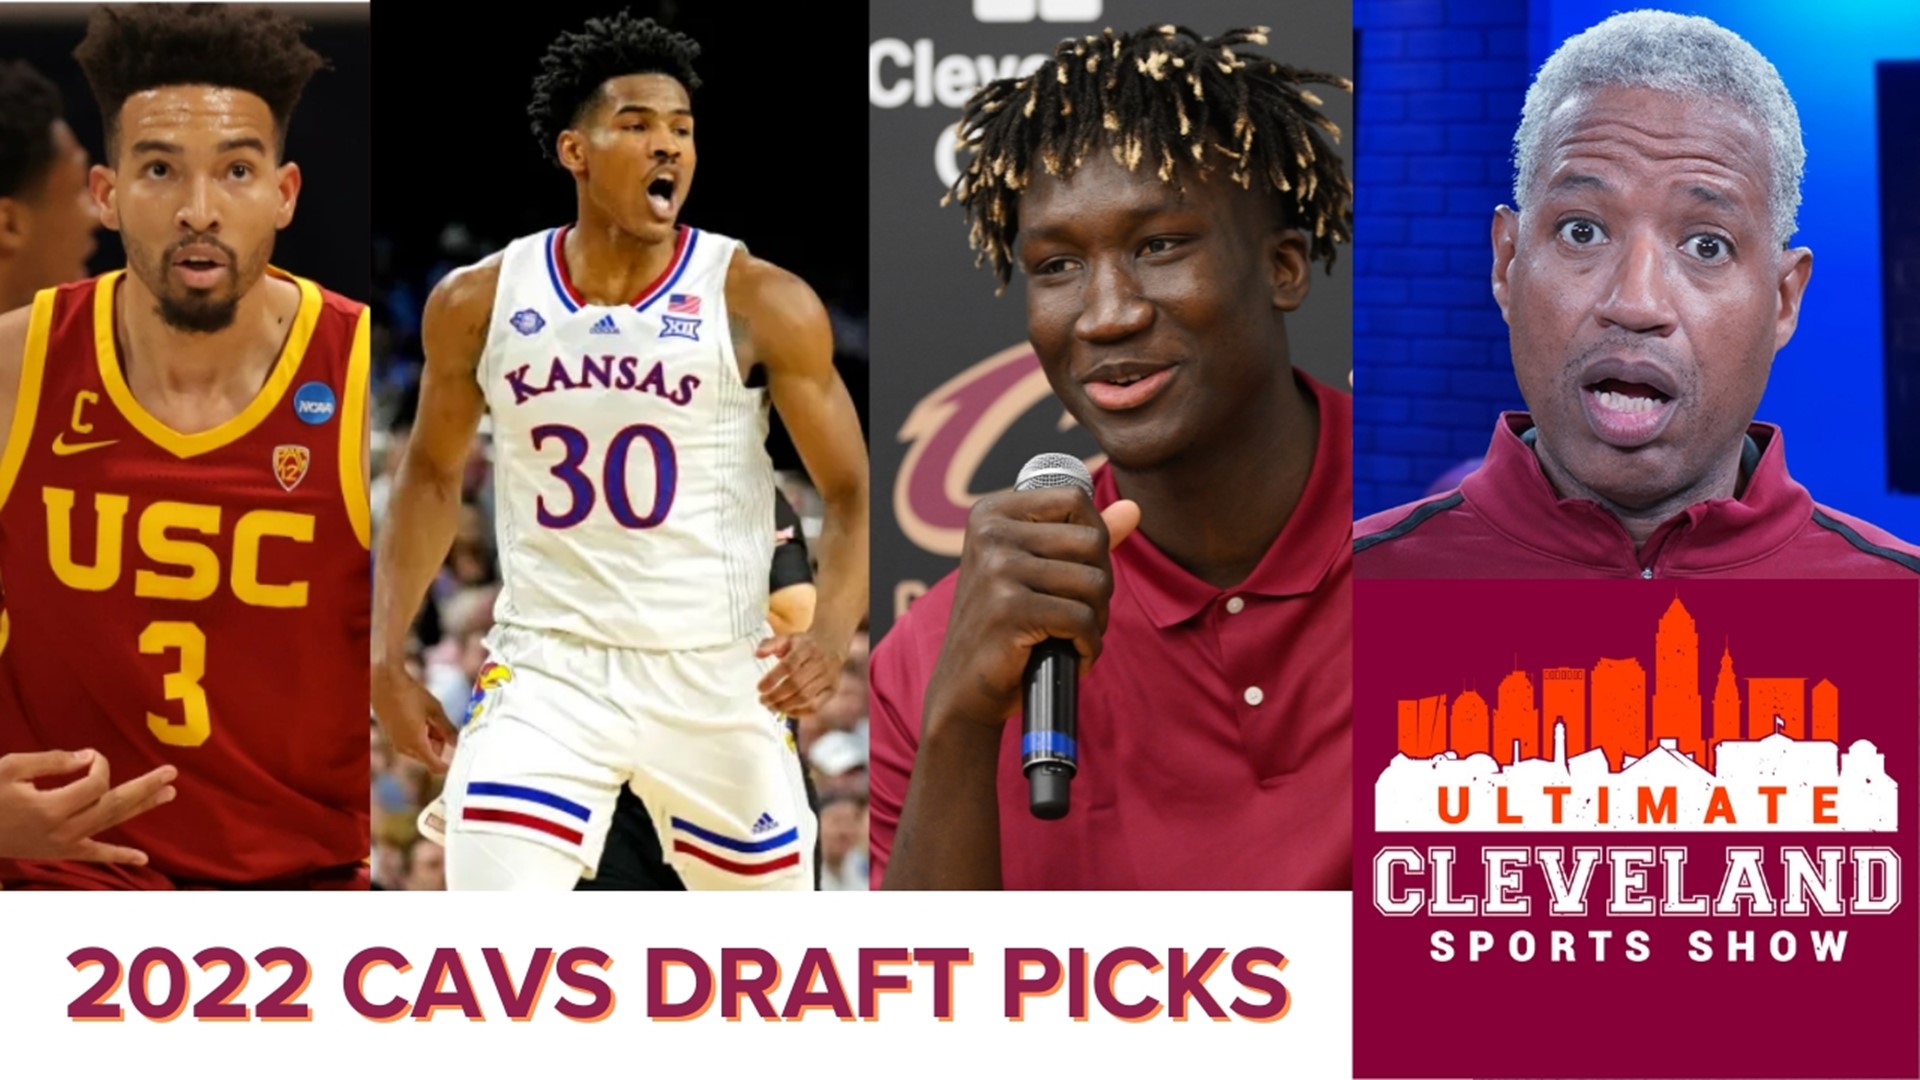 The UCSS crew reacts to the new draft picks for the Cleveland Cavaliers. Ochai Agbaji, Isaiah Mobley, and Khalifa Diop were chosen.